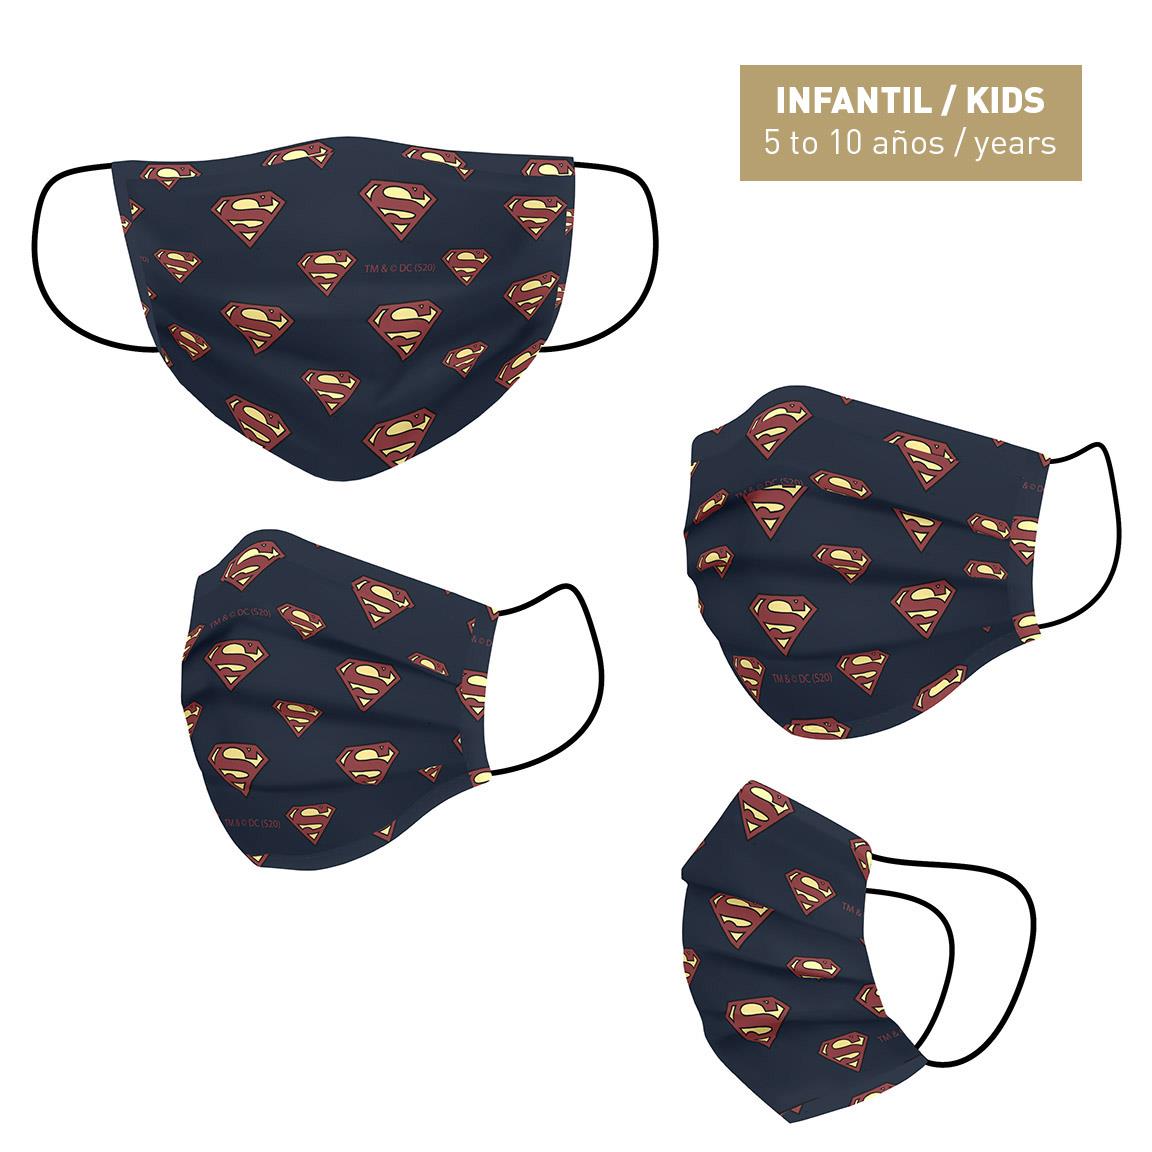 HYGIENIC MASK REUSABLE APPROVED SUPERMAN